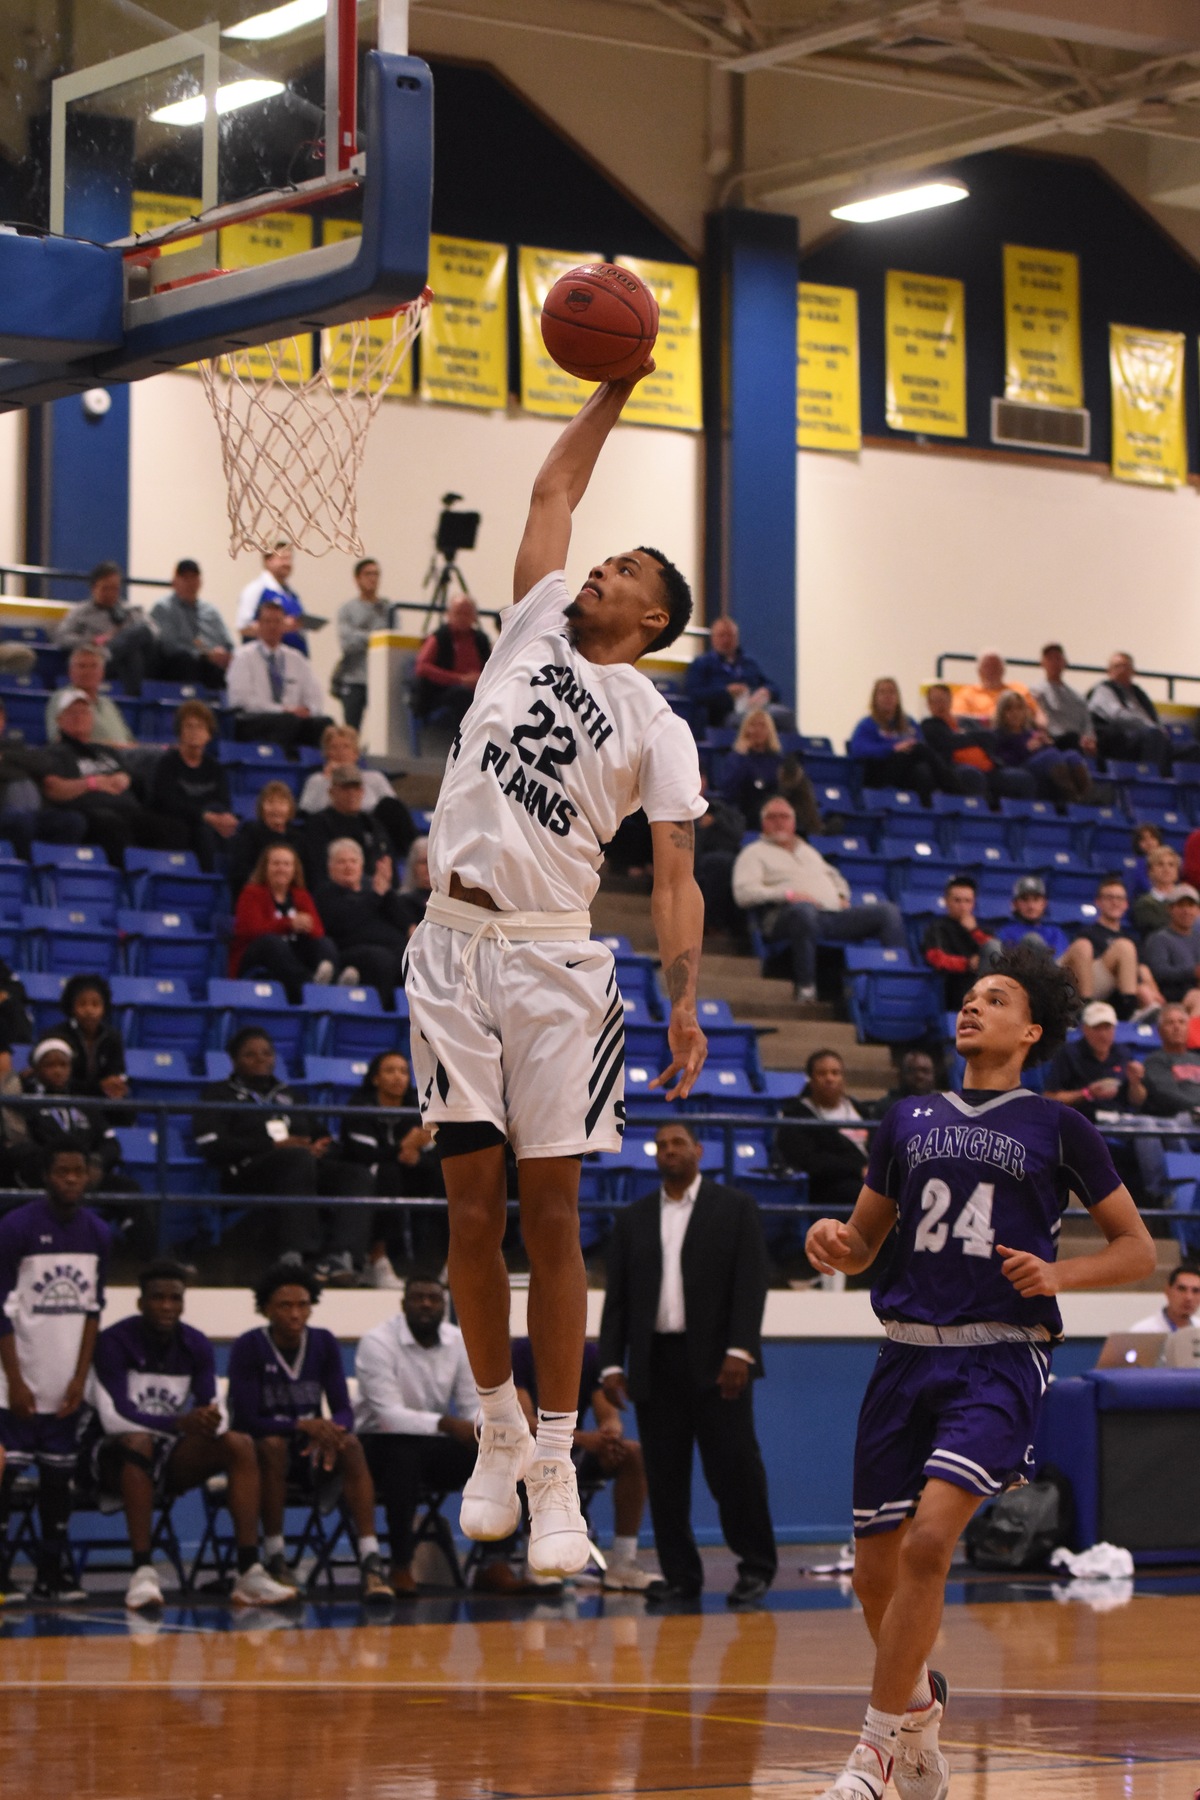 Texans dismantle Ranger 89-75 Wednesday in opening round of Region V Tournament in Wolfforth